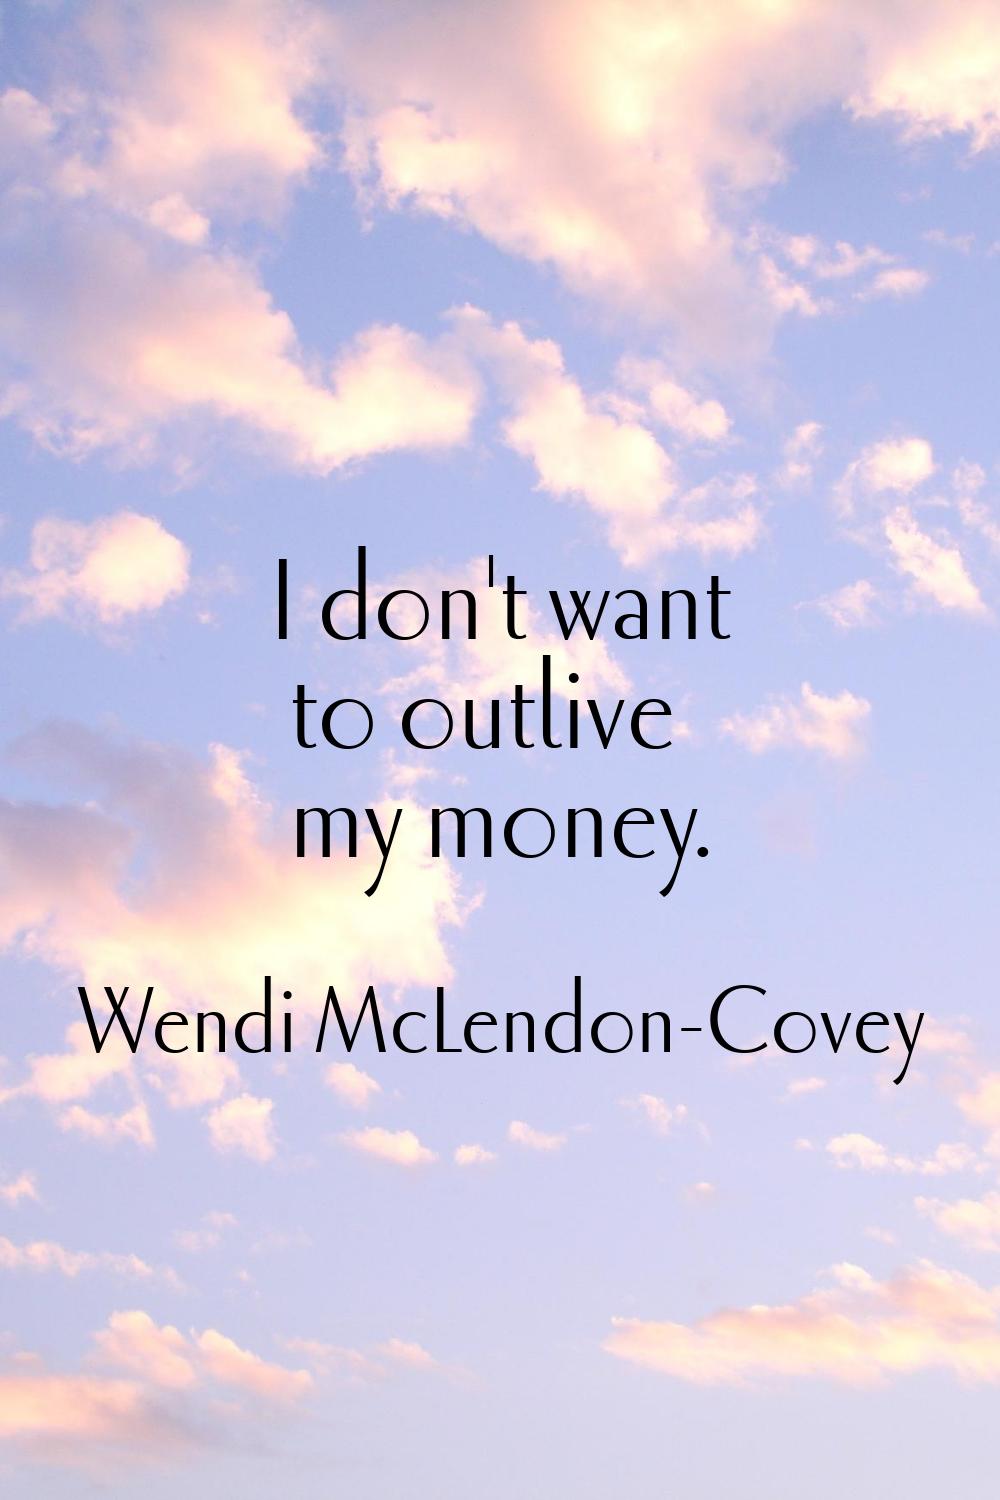 I don't want to outlive my money.